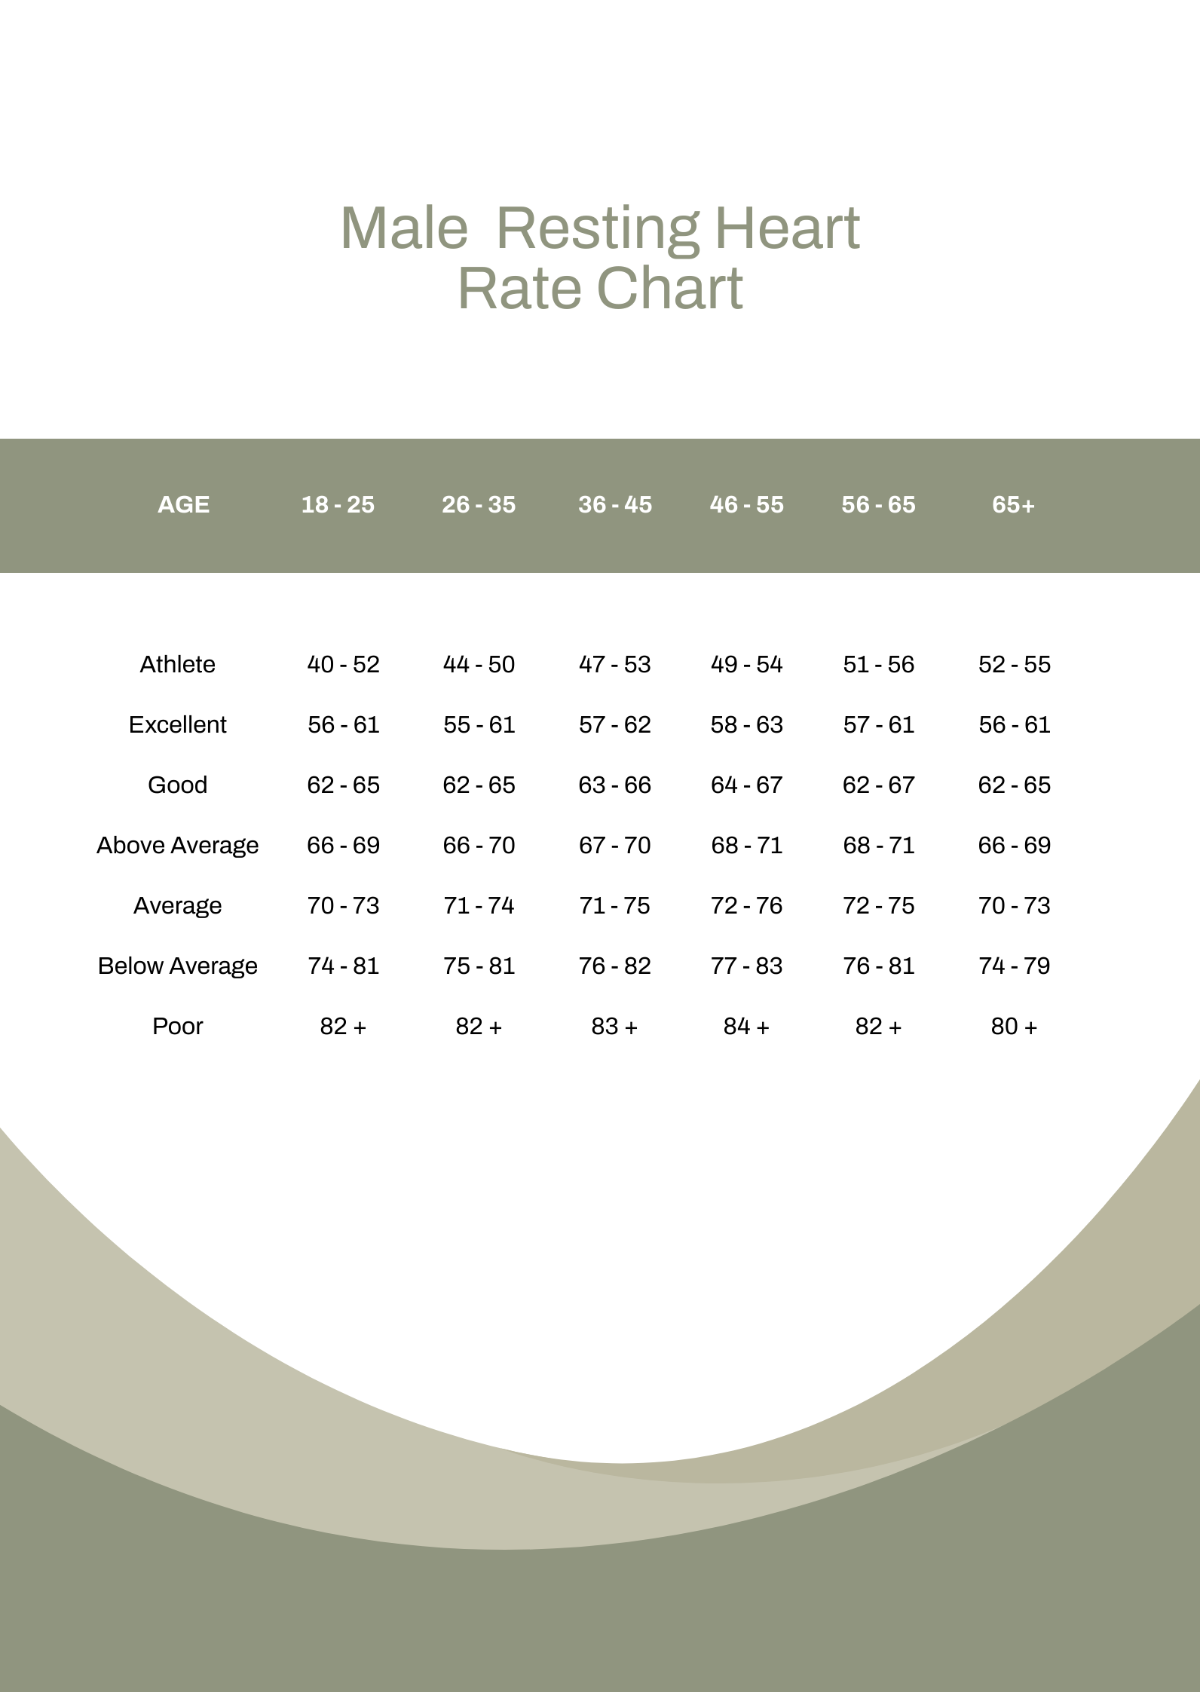 Male Resting Heart Rate Chart